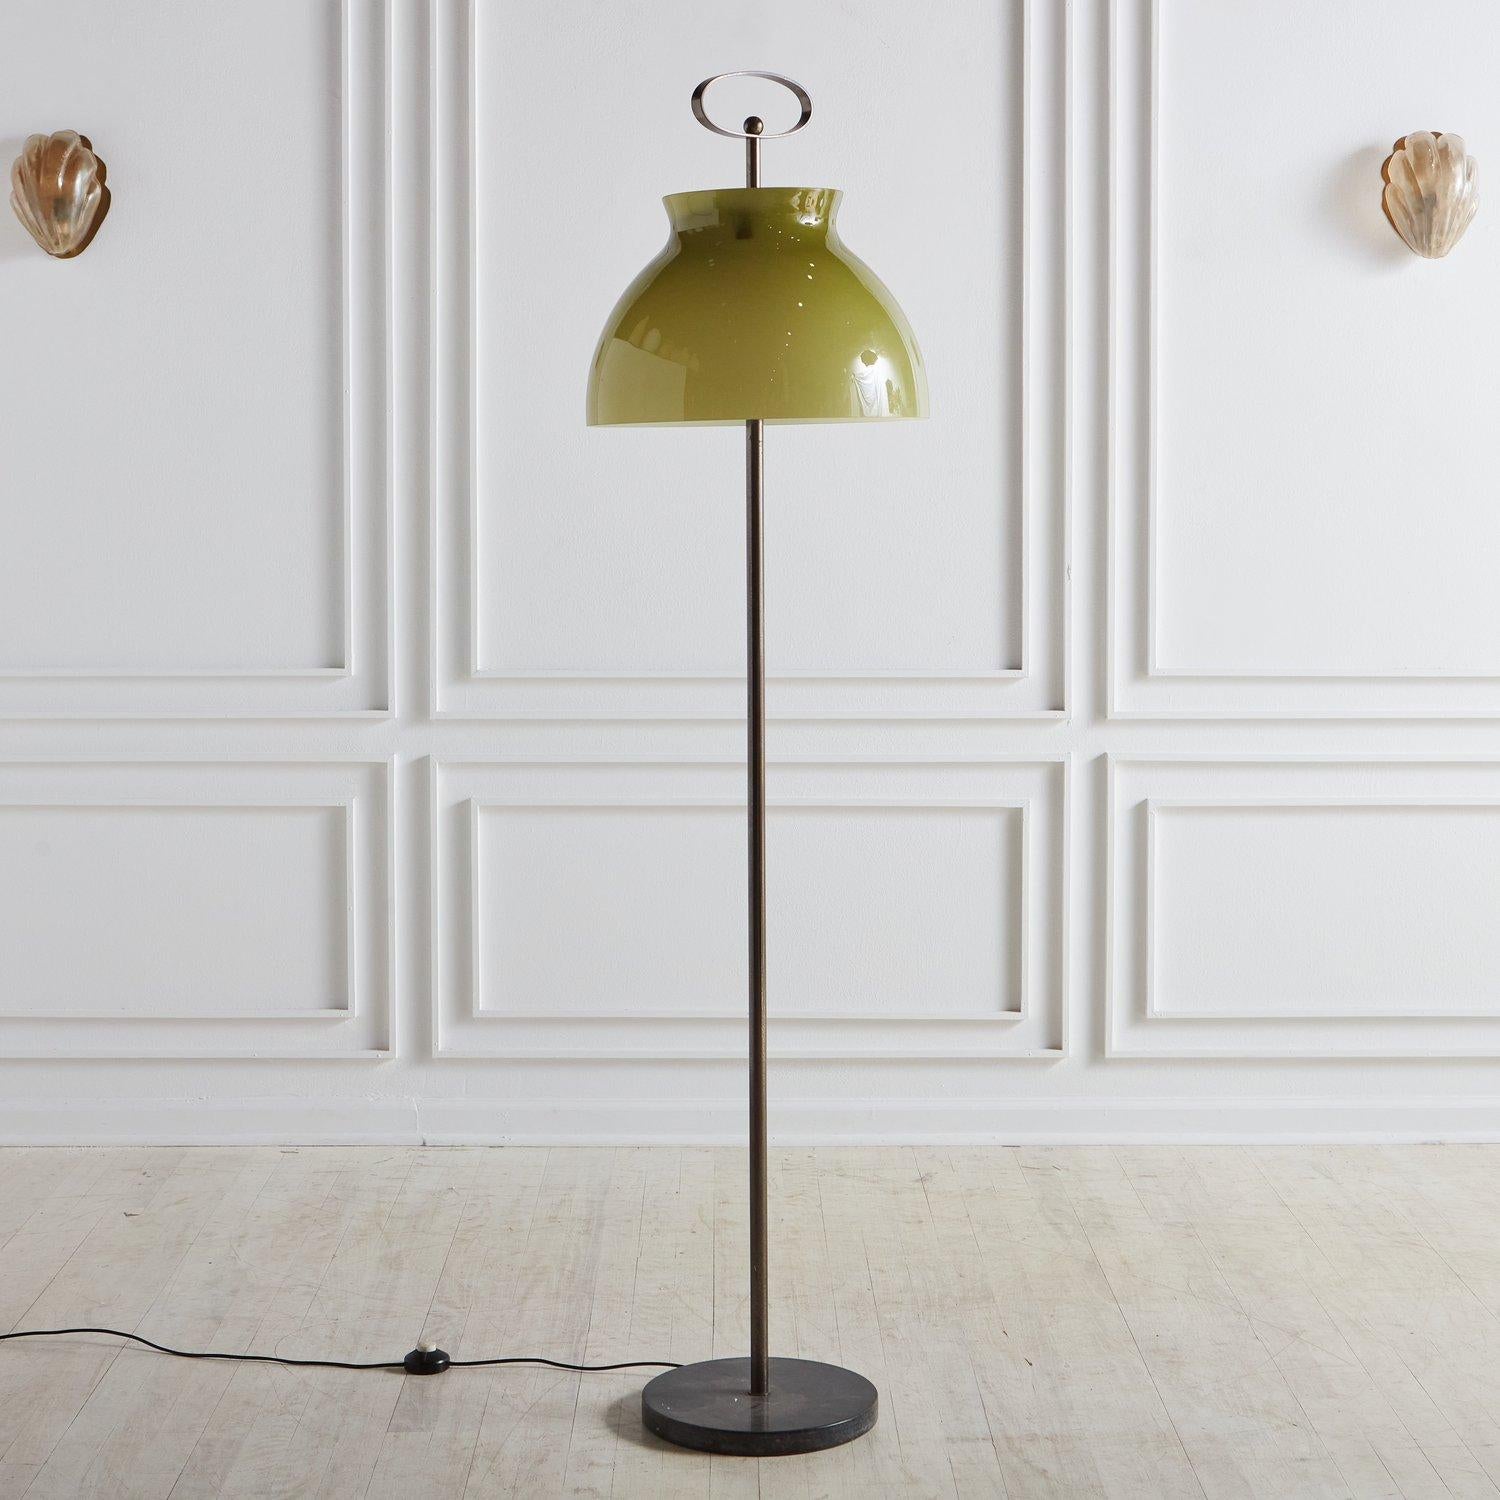 A vintage floor lamp featuring an oversized olive green glass shade and a sculptural oval finial. This lamp has a sleek patinated steel body with a round black marble base. Sourced in Italy, 1970s.

 Measures: 66” Height x 12” Diameter base; glass